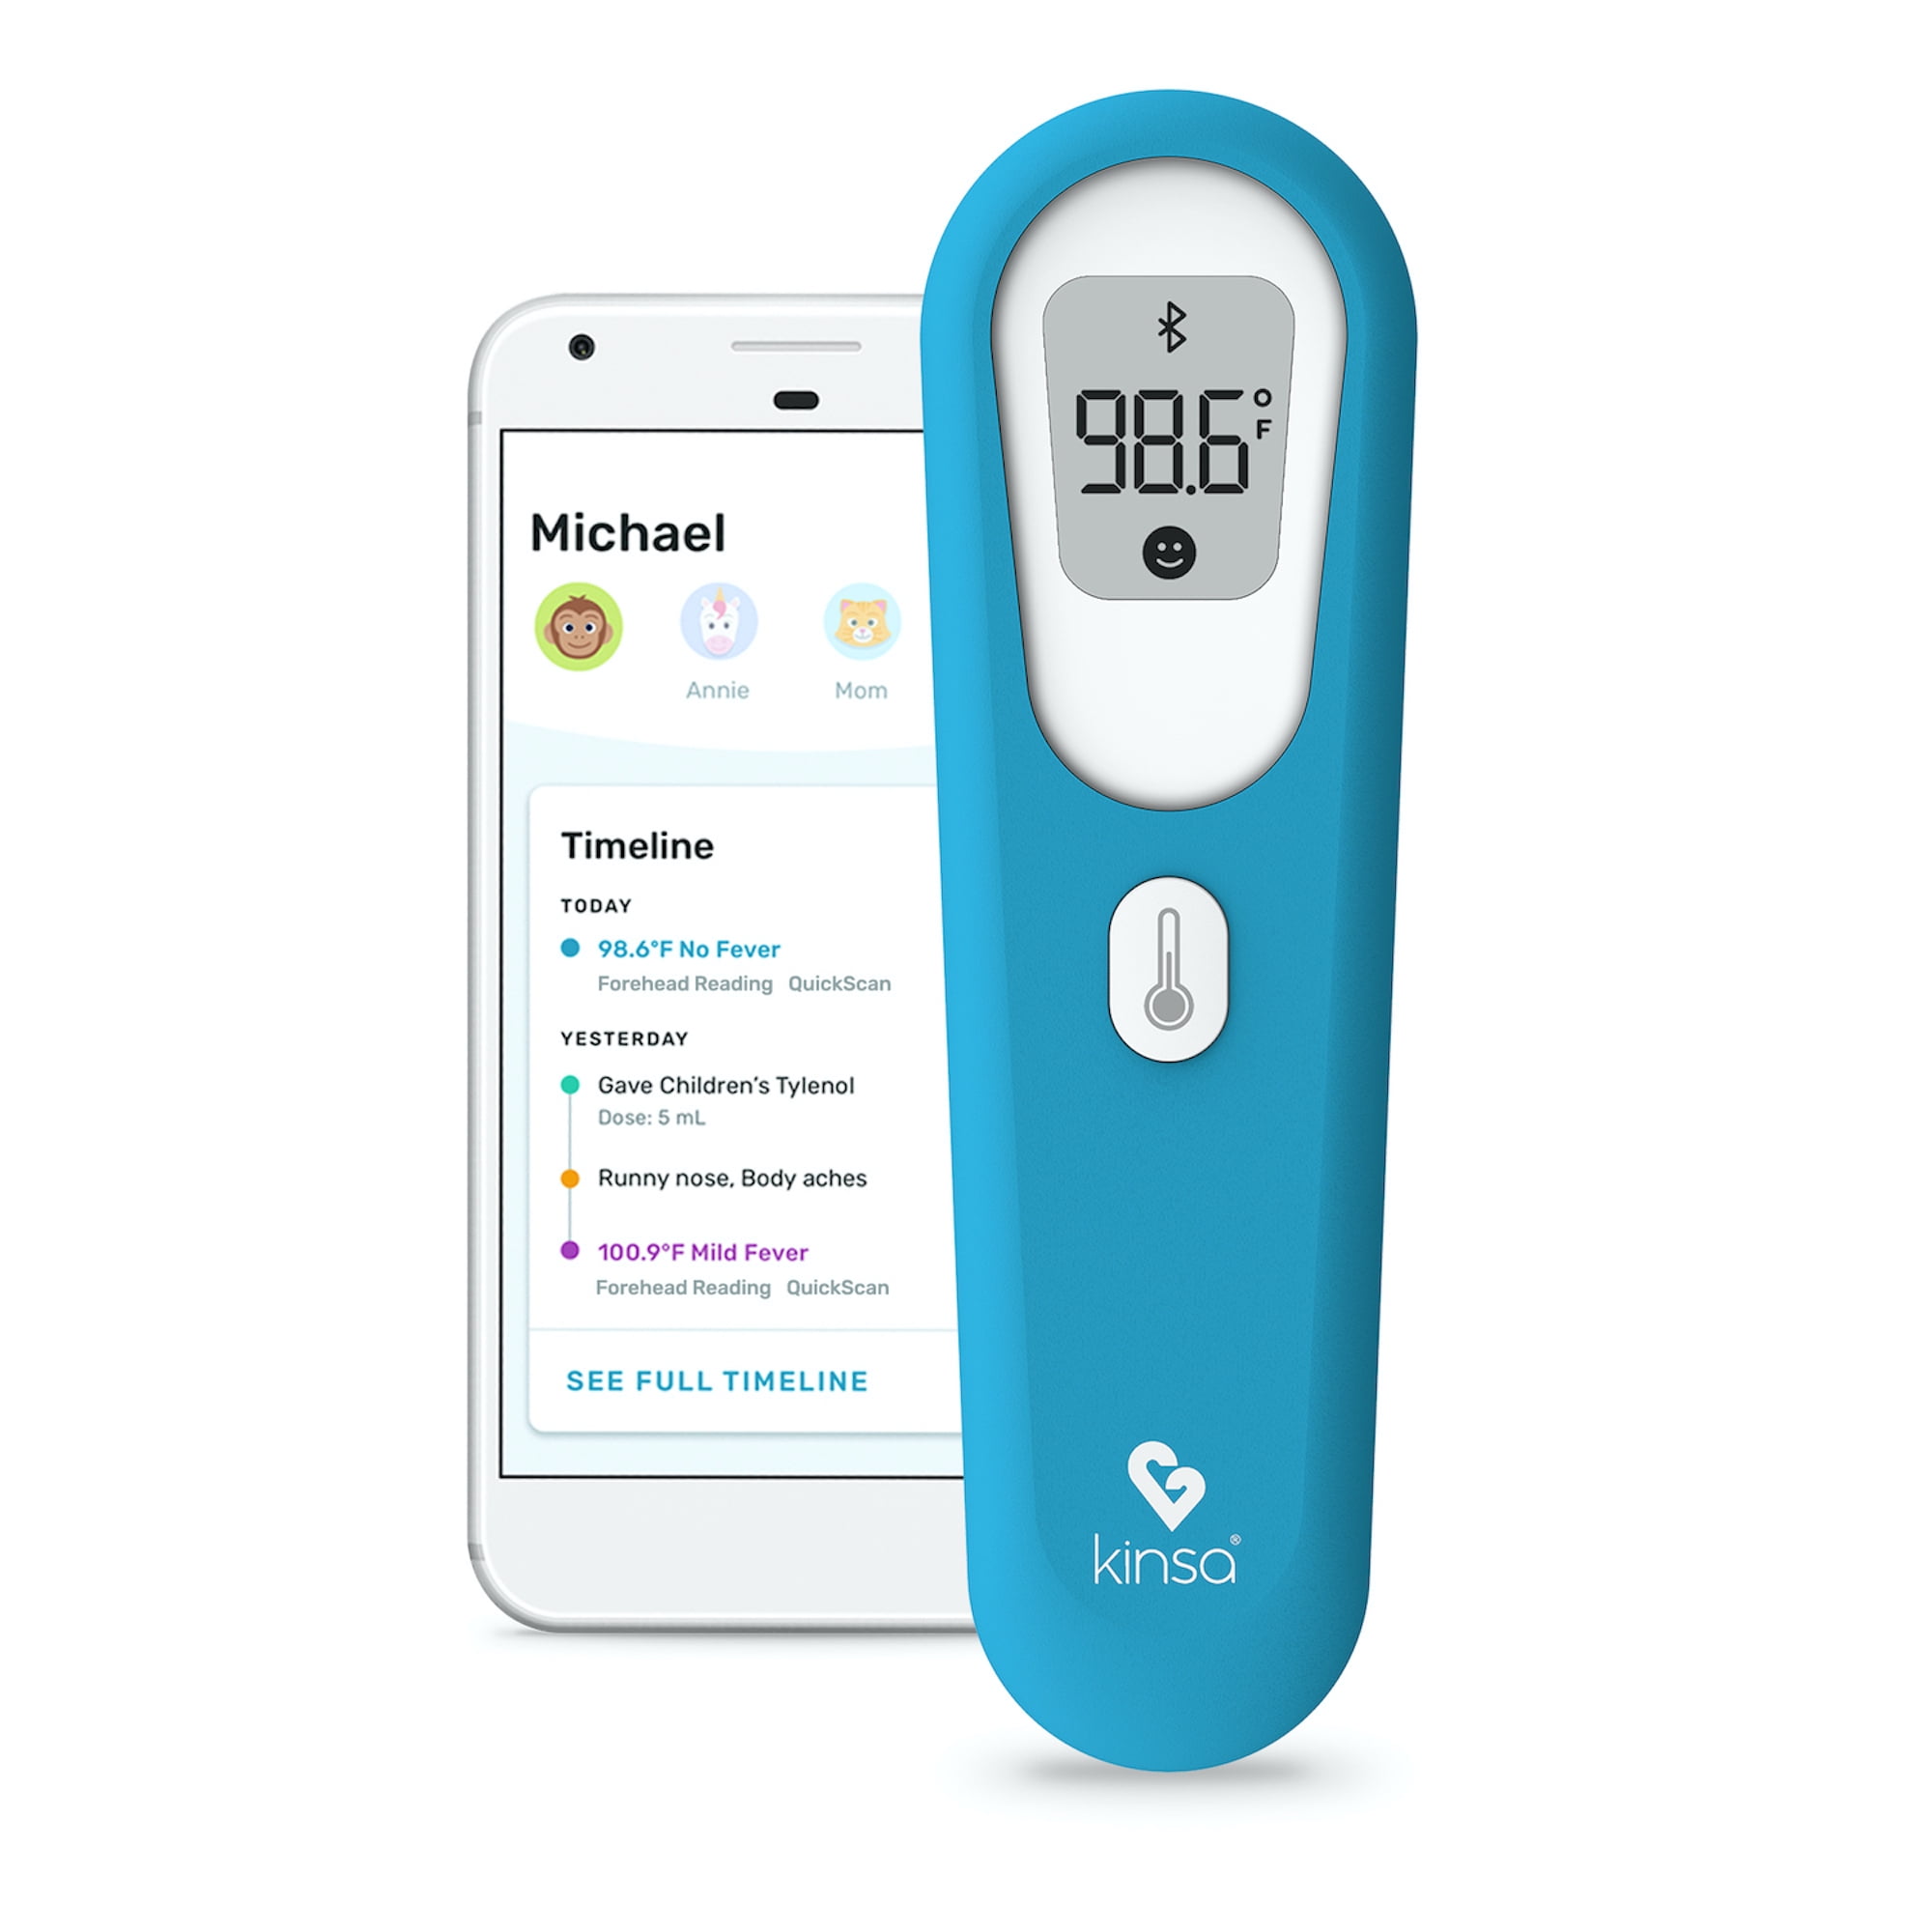 Smart Thermometer Apps : Thermometer App